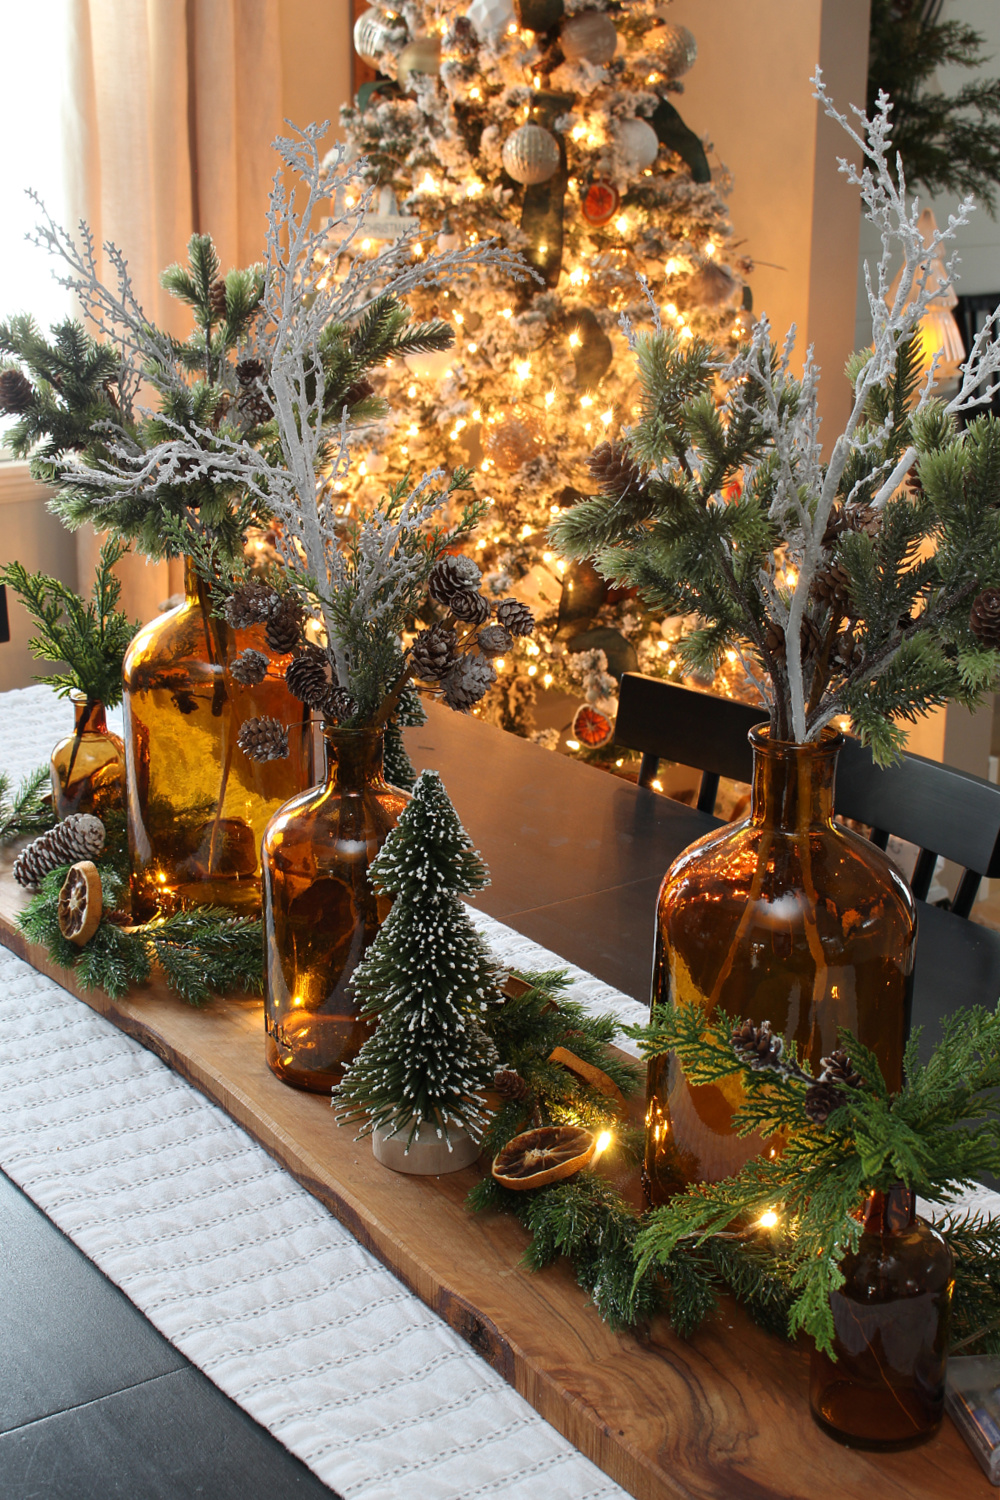 Amber glass centerpiece lit up with Christmas lights.